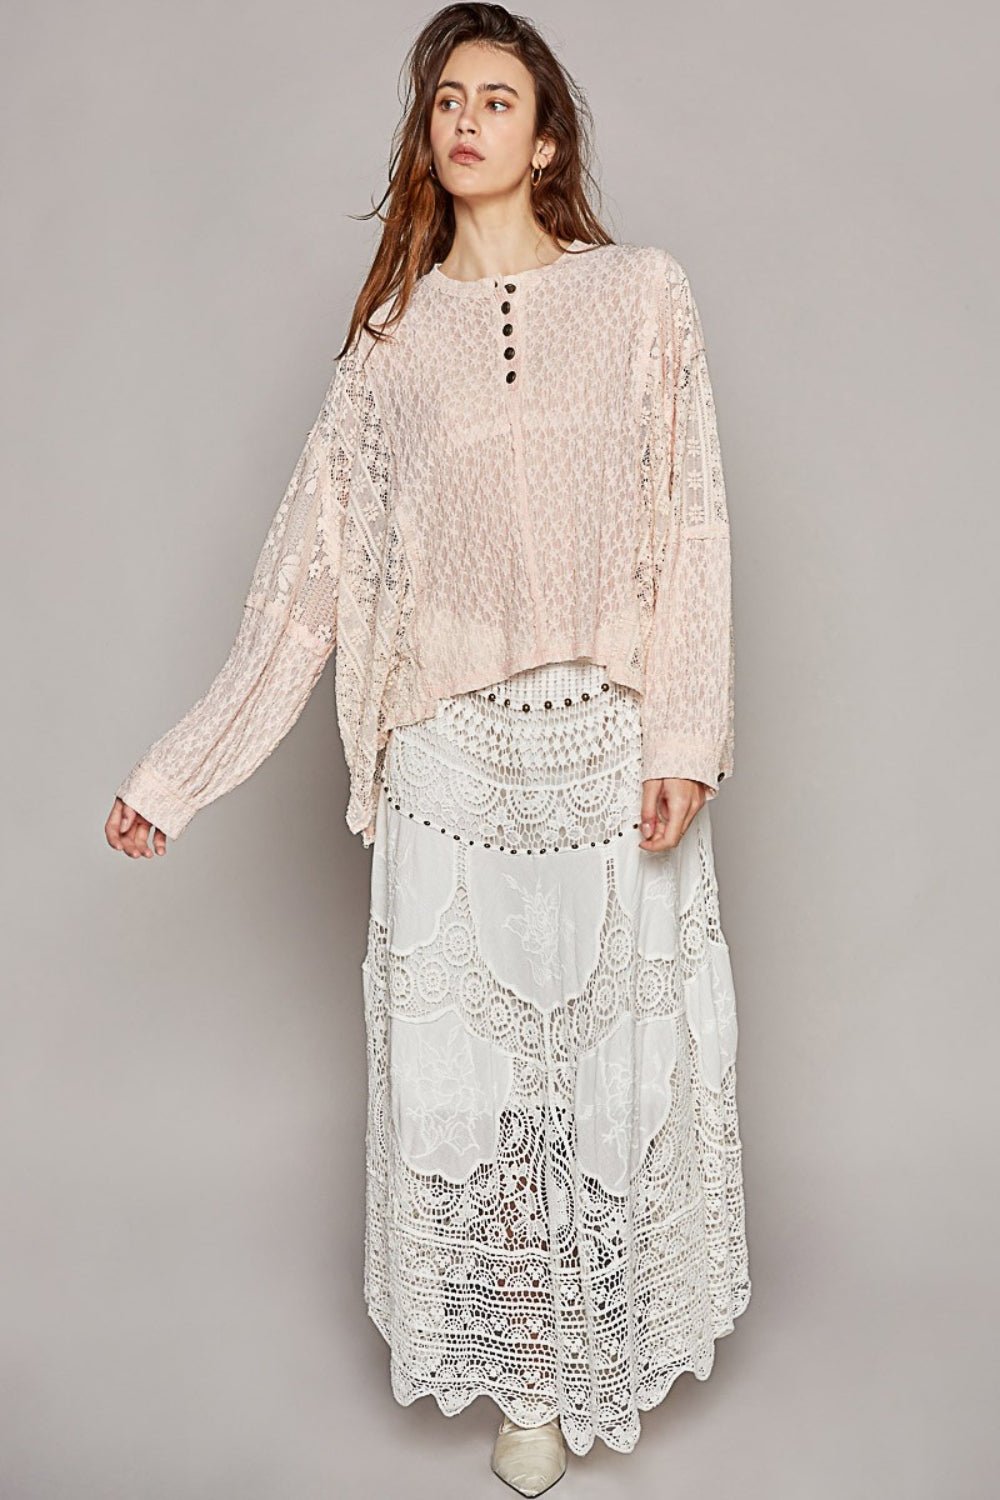 POL Round Neck Long Sleeve Raw Edge Lace Top - Happily Ever Atchison Shop Co.